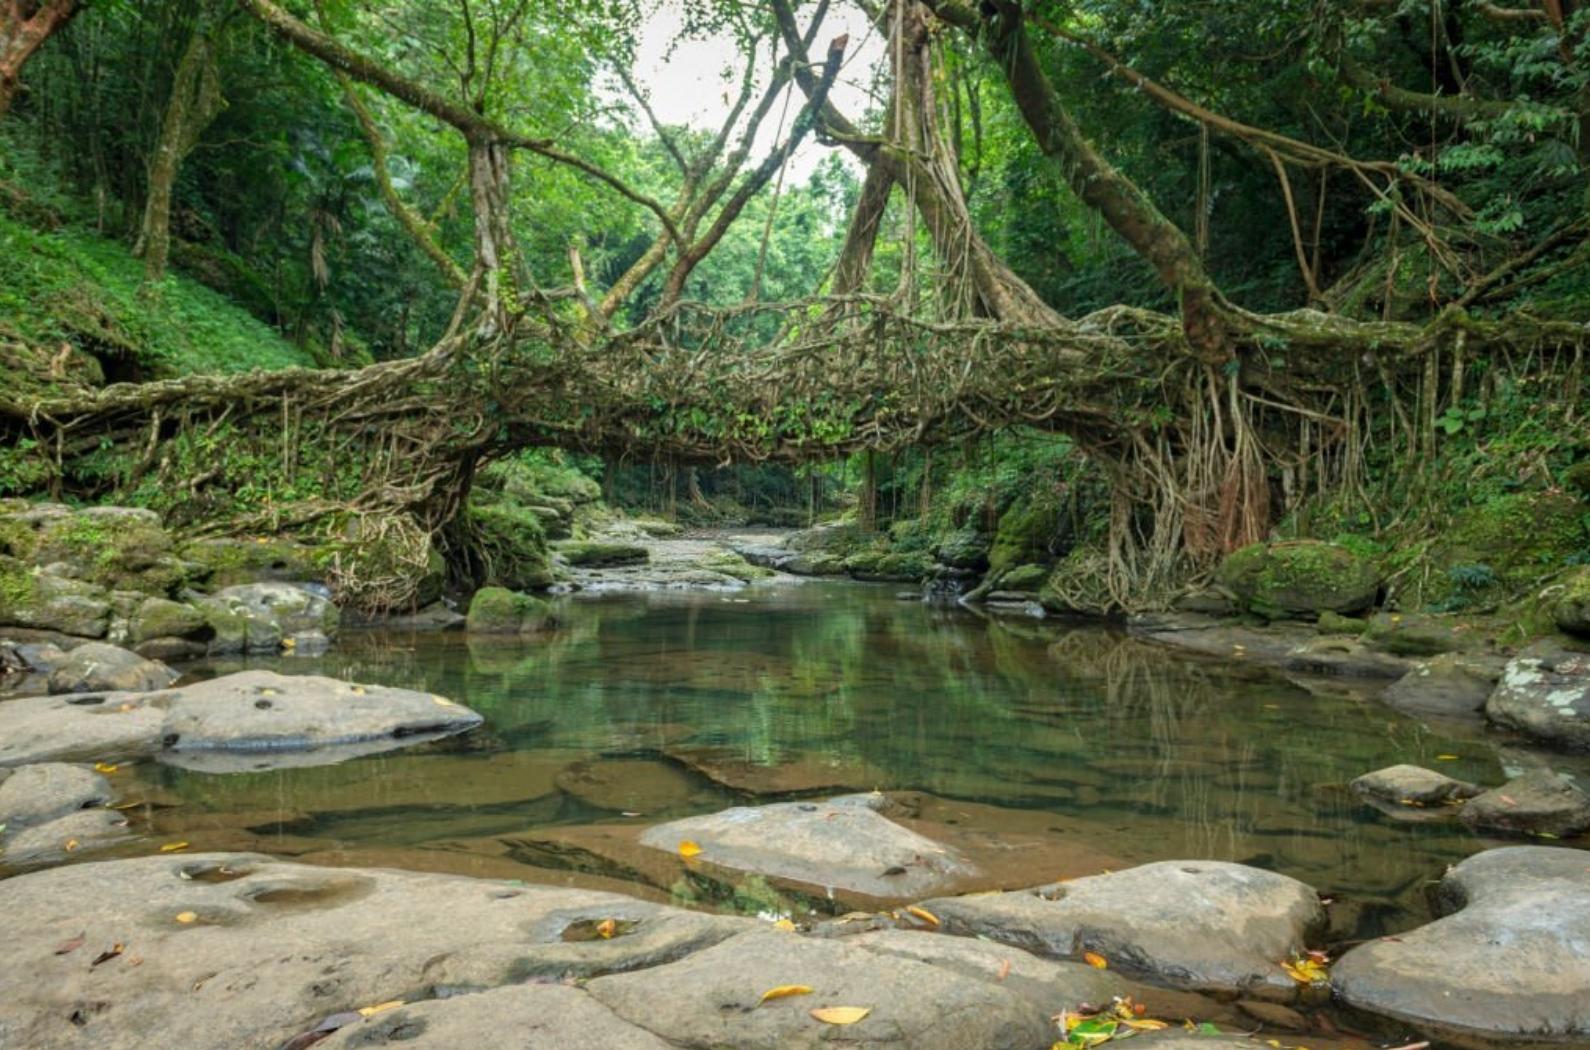 Living Root Bridge handmade from the aerial roots of rubber fig trees (Ficus elastica) by the Khasi and Jaintia peoples Meghalaya, India.